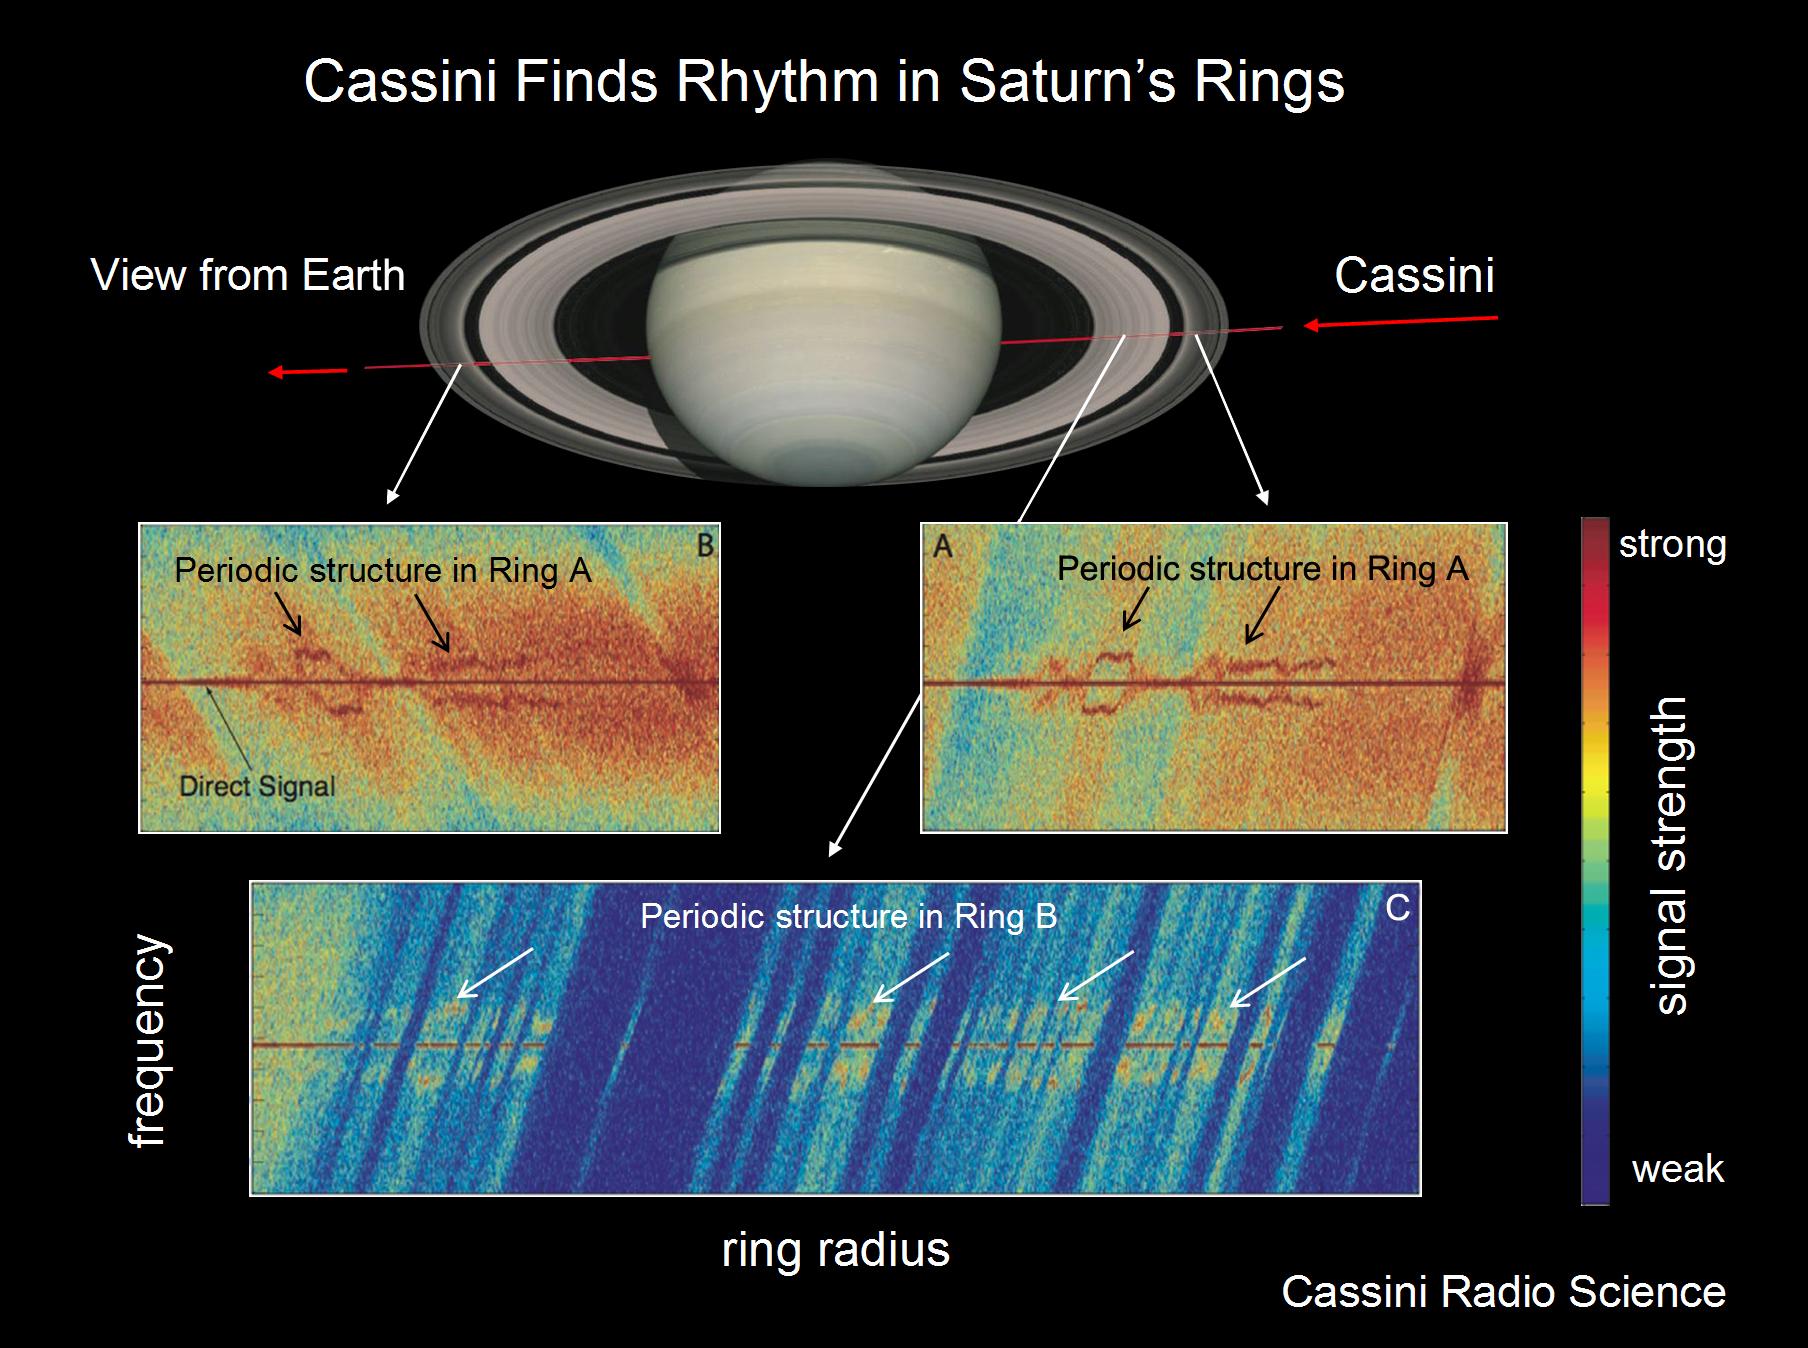 Illustration of the harmonic structure found in various parts of Saturn's rings